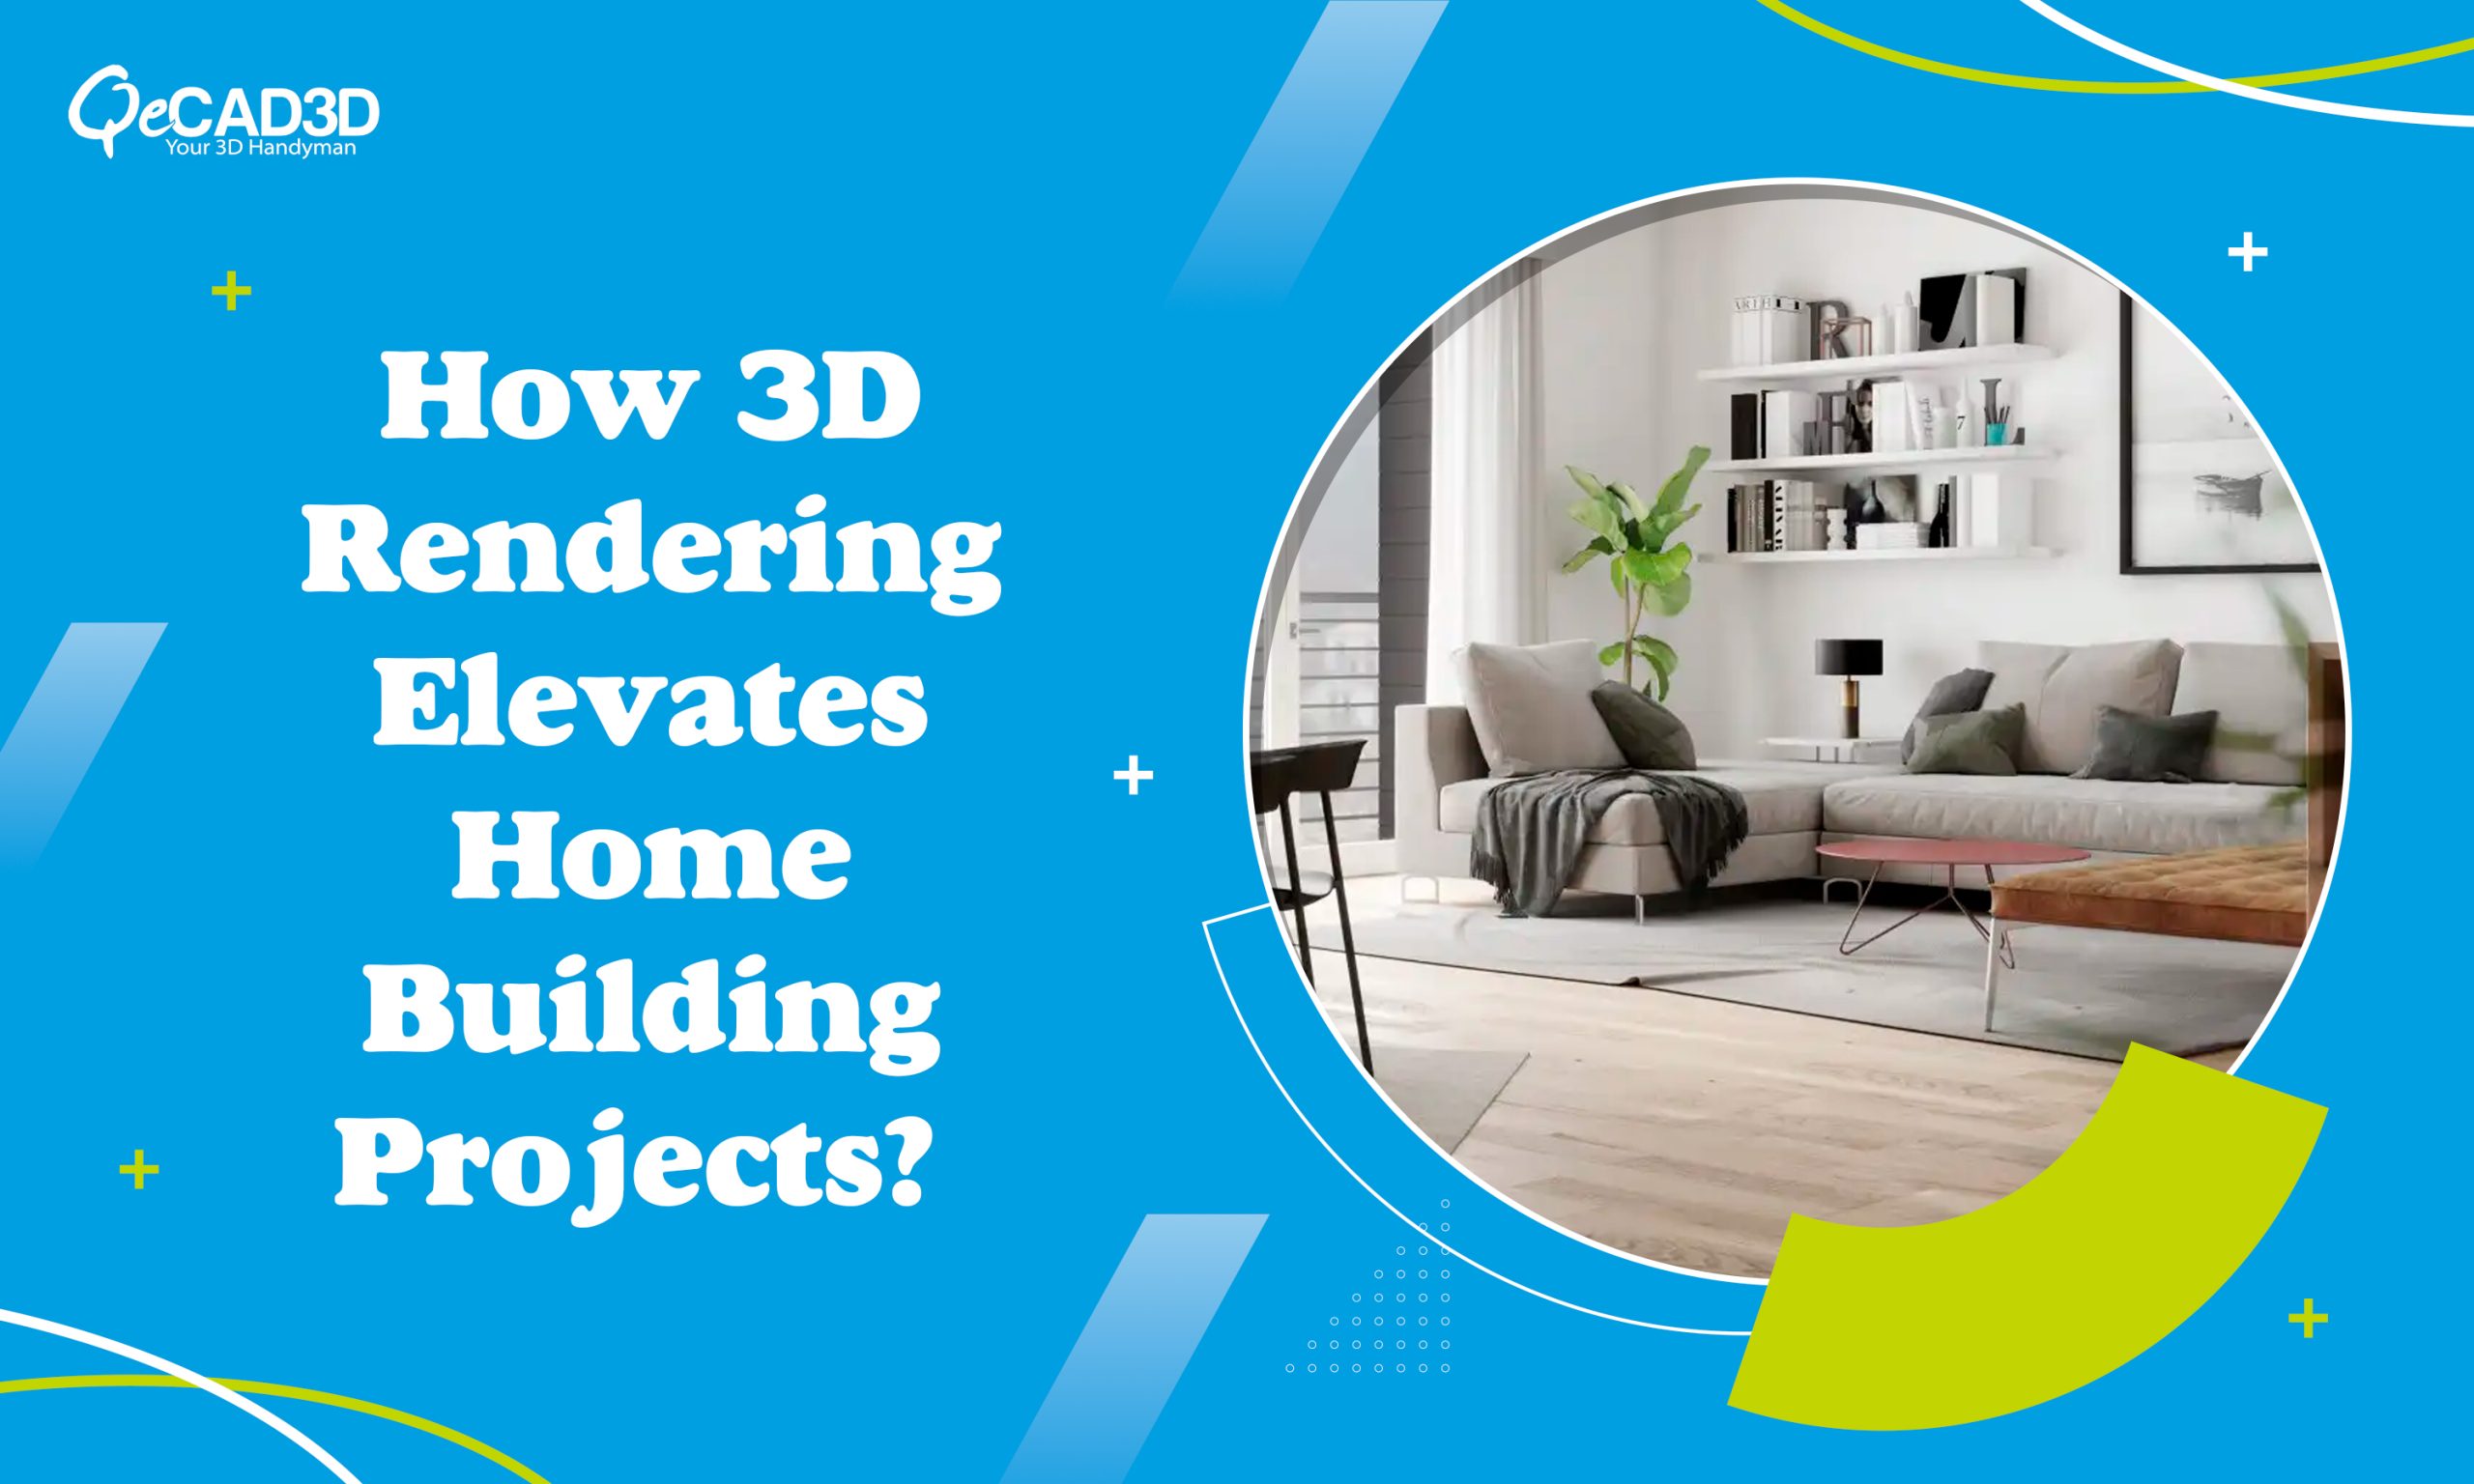 How 3D Rendering Elevates Home Building Projects?